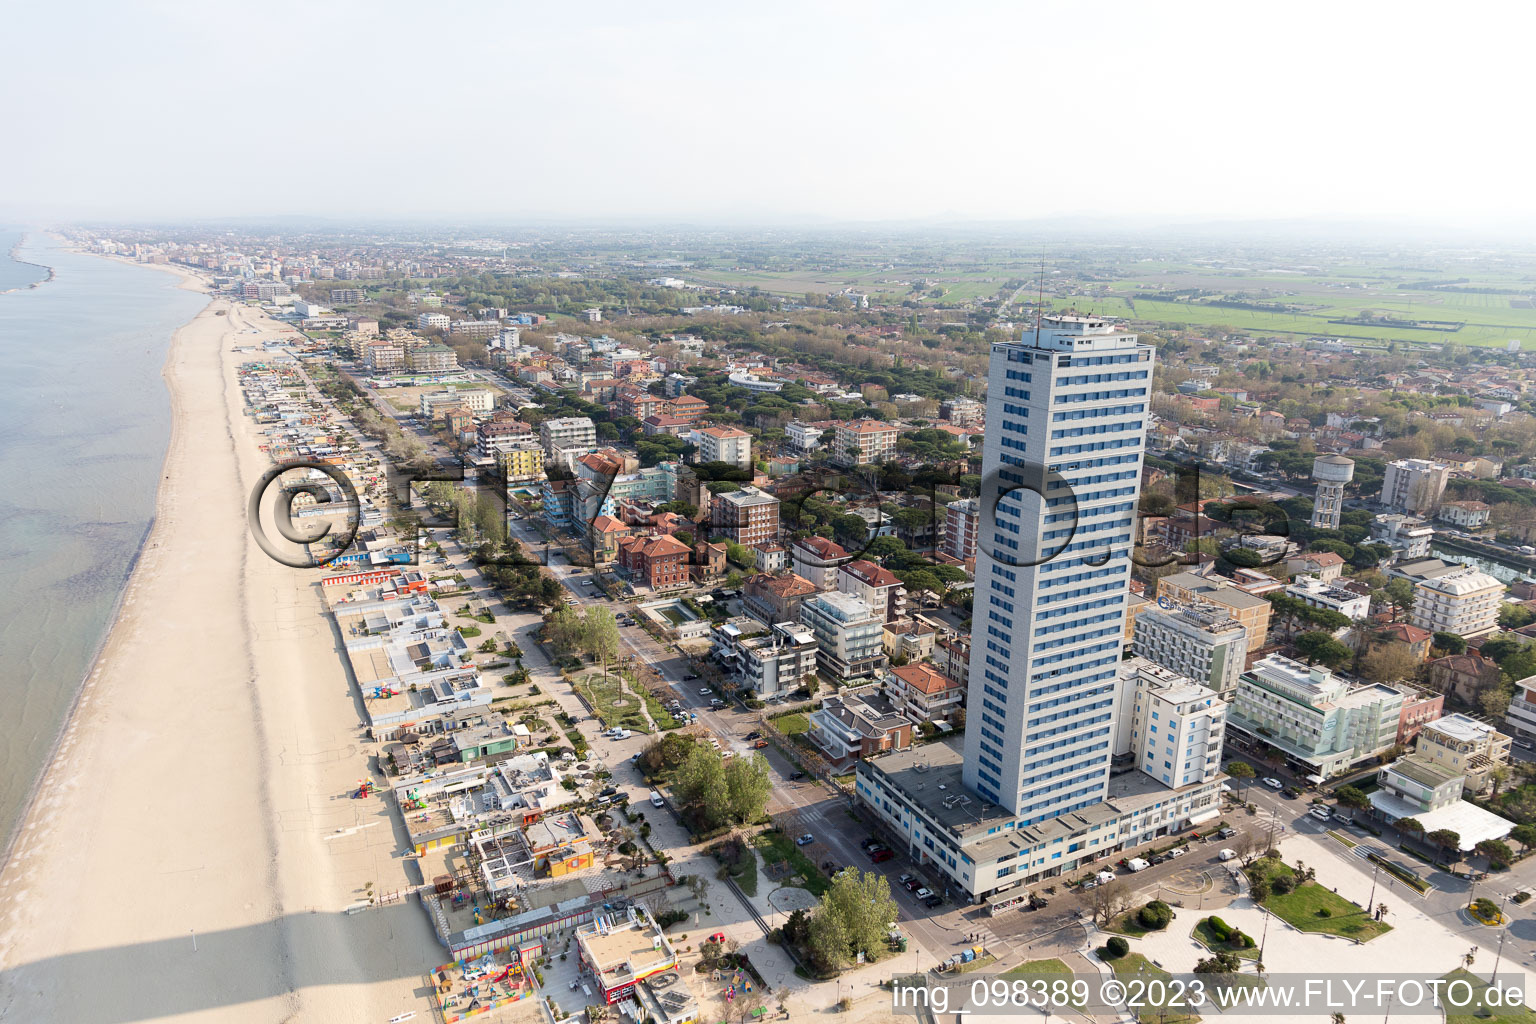 Cesenatico in the state Emilia Romagna, Italy seen from above